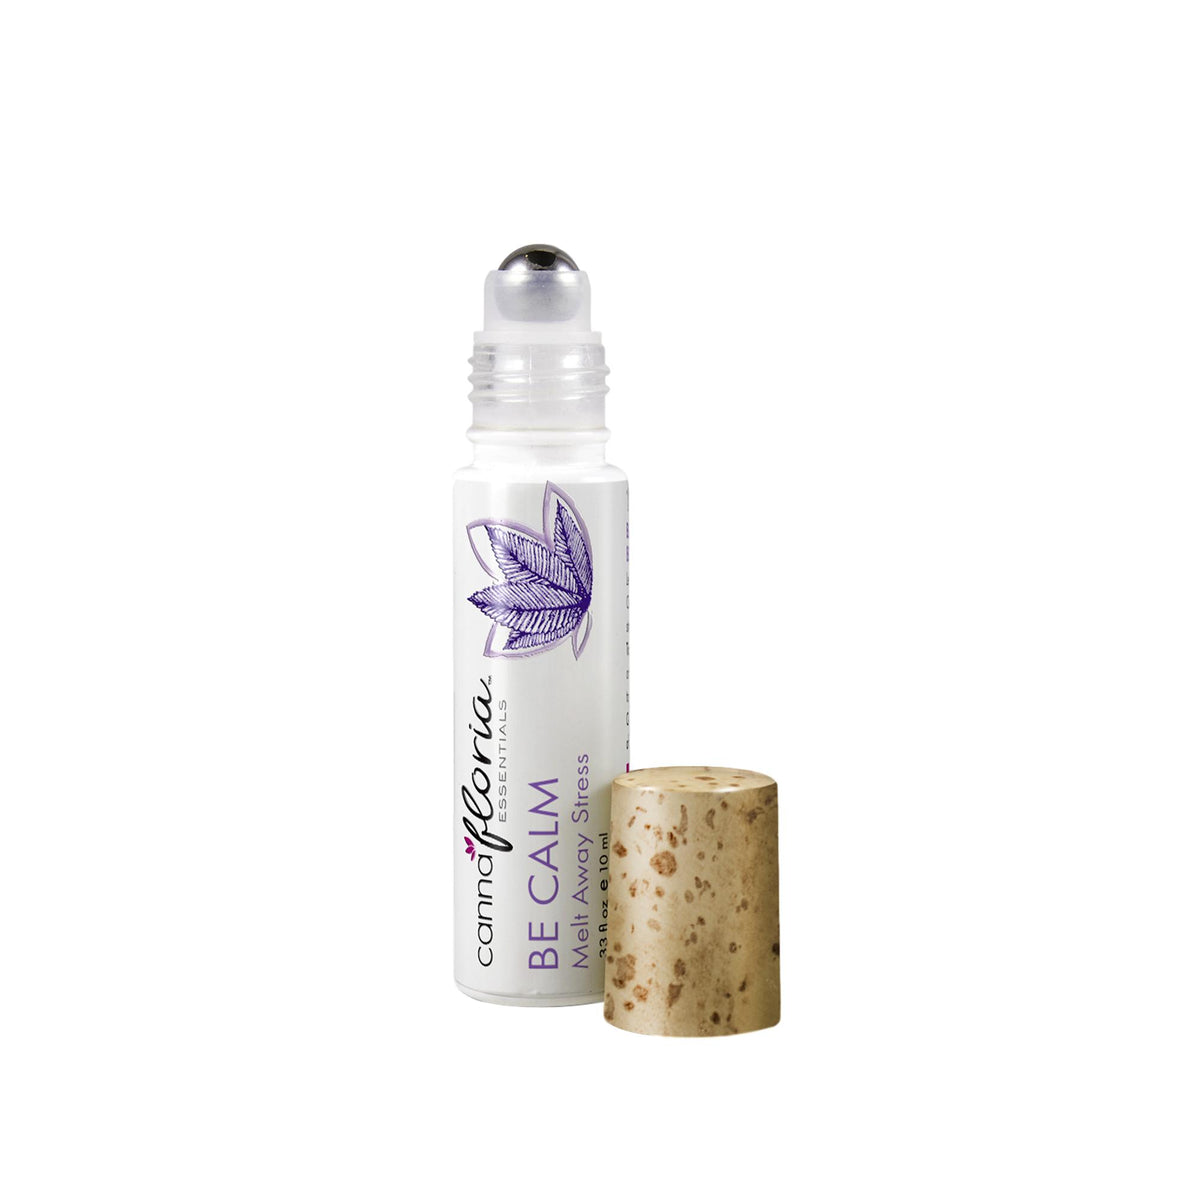 Cannafloria Aromatherapy Roll-On, Be Calm